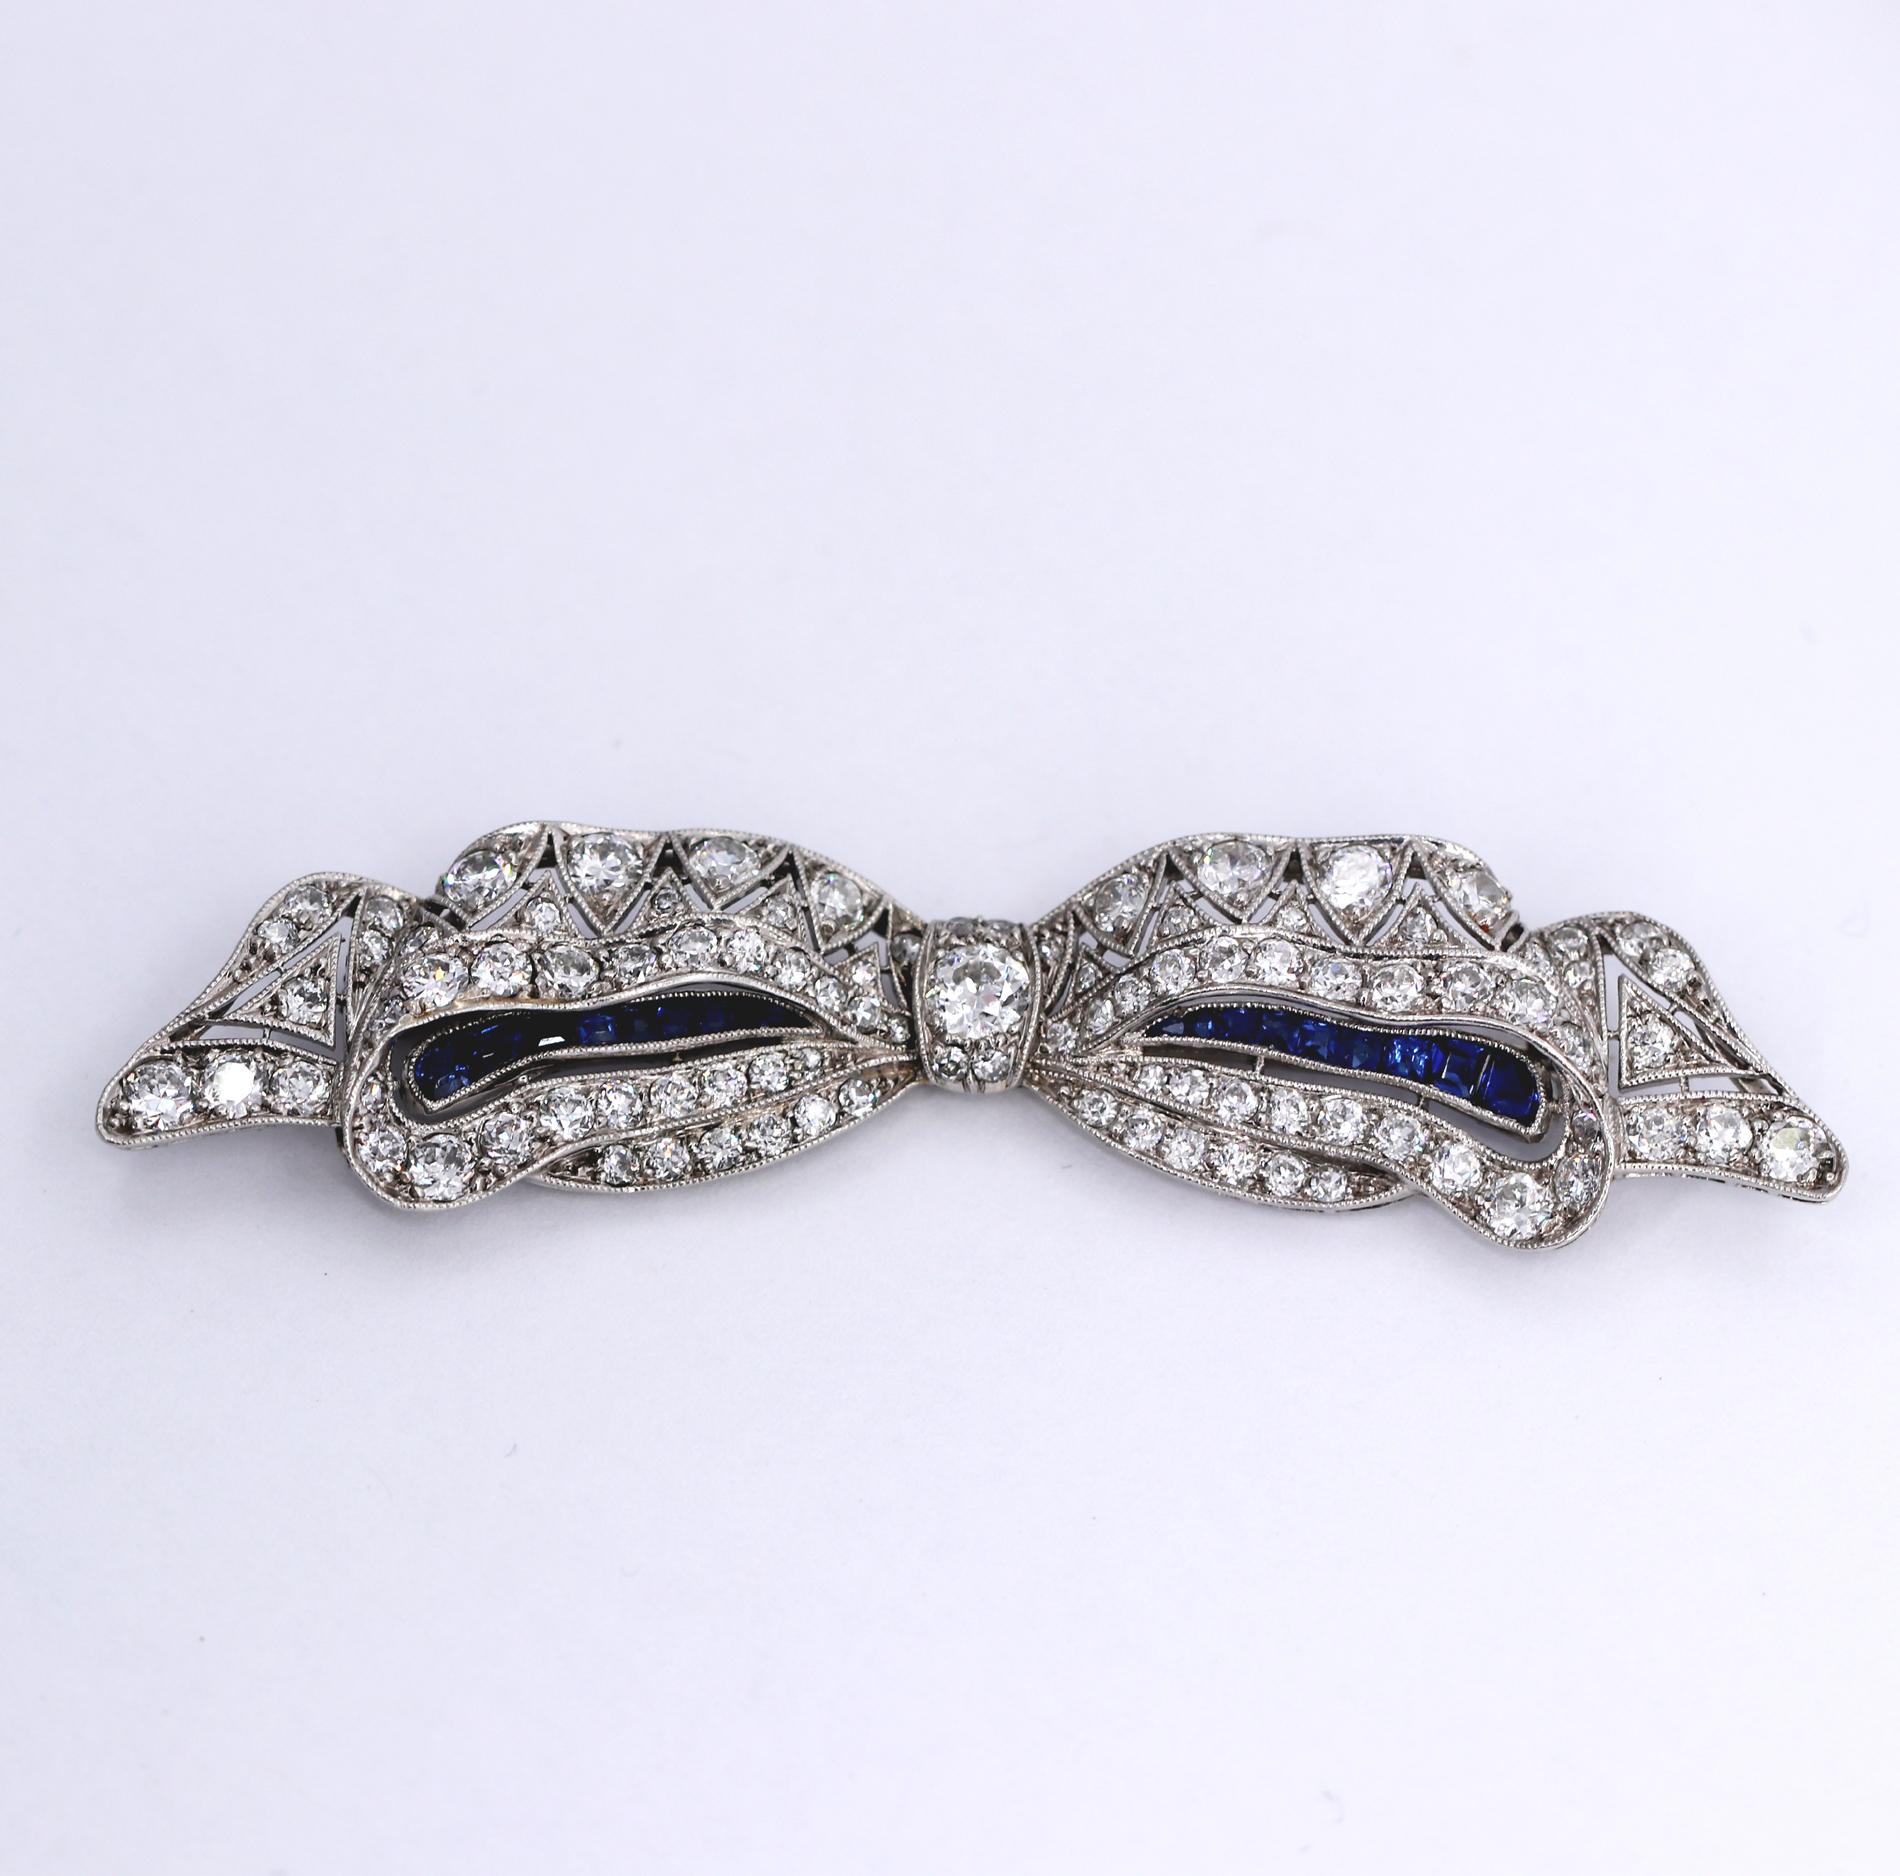 One ladies early twentieth century bow brooch set with assorted old European cut diamonds weighing approximately 4.25ct of overall G-I color and VS1-SI1 clarity. Inside the bow, on either side are channels set with a total of 18 French cut sapphire